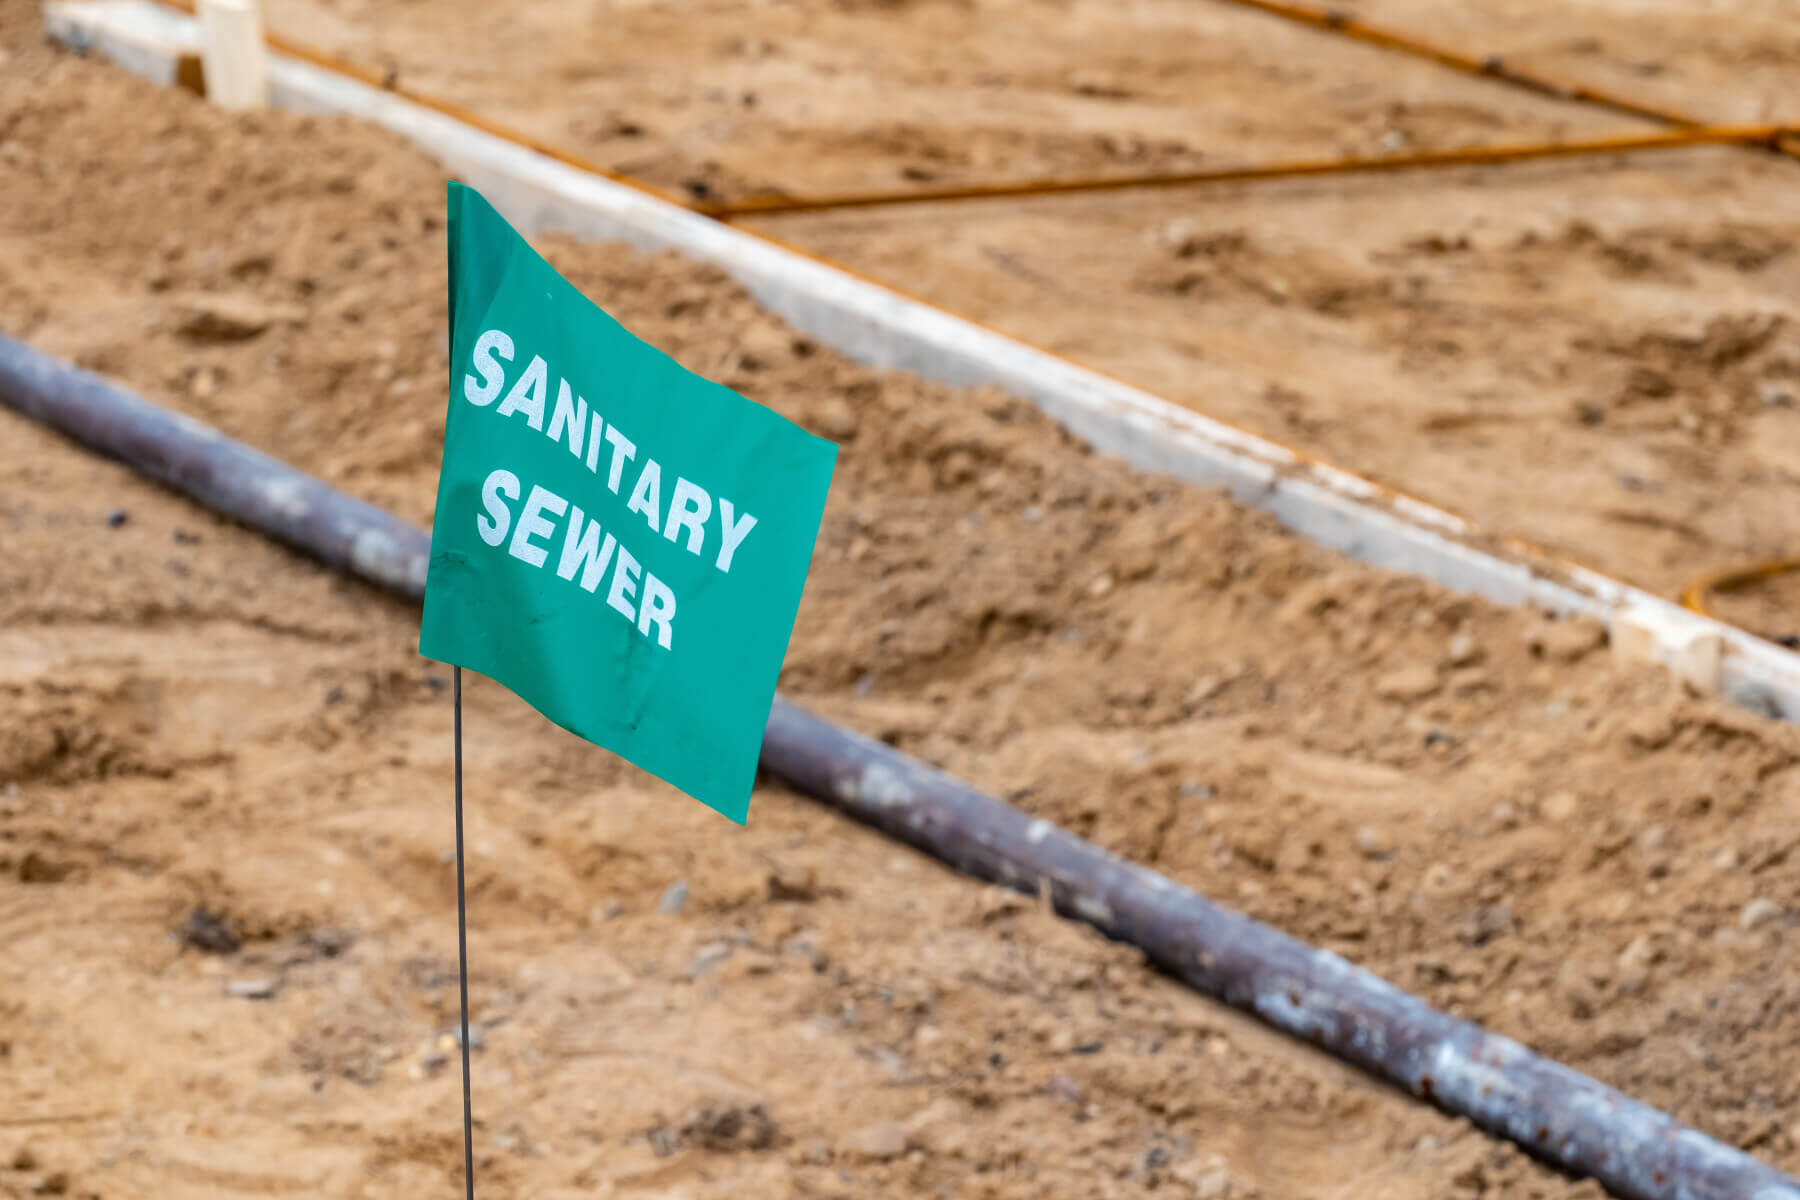 Stock image of sanity sewer construction site